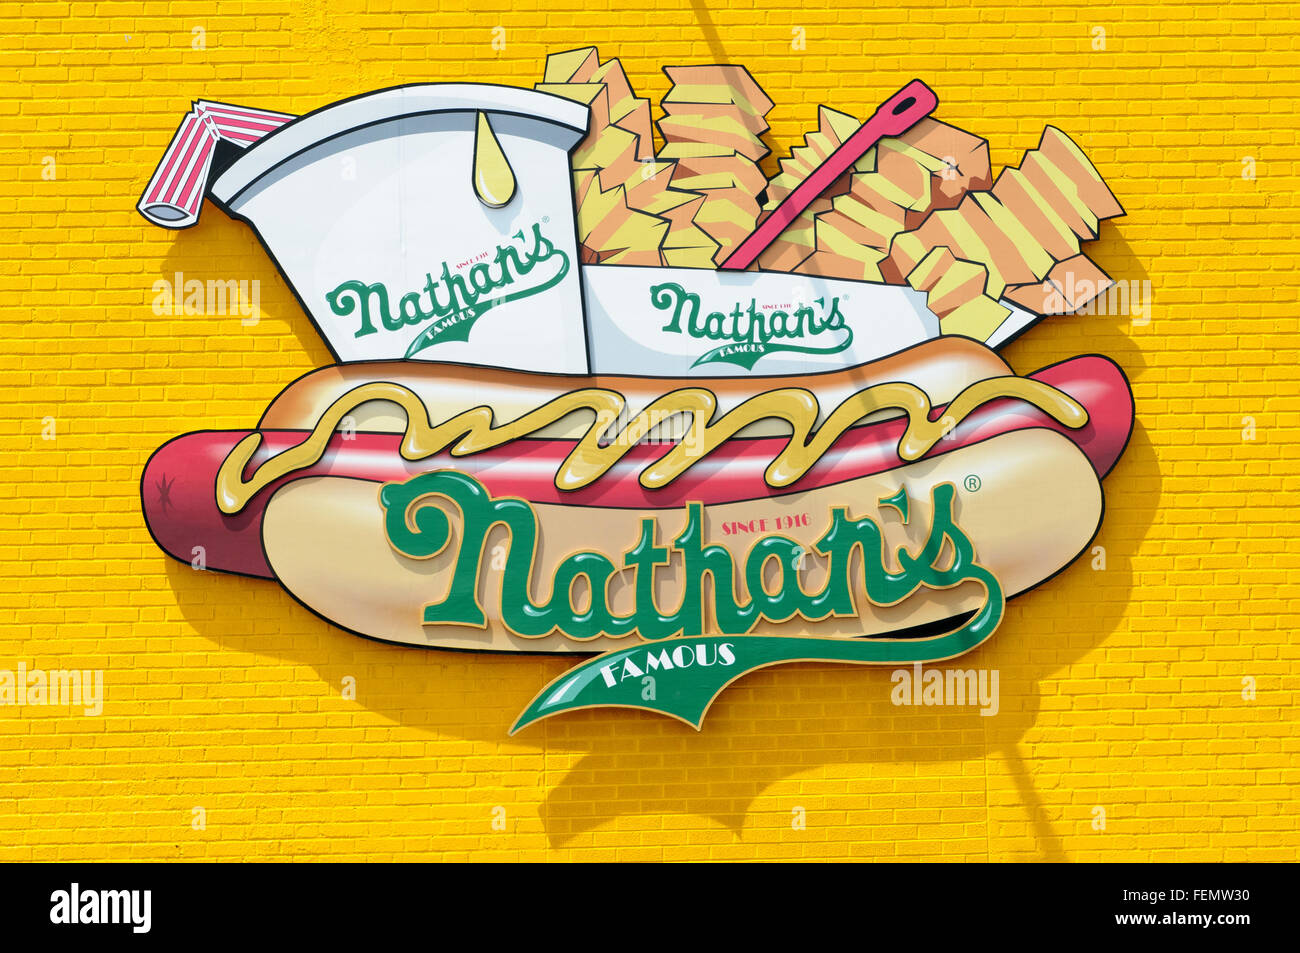 Nathan's Famous Inc. sign on a yellow painted brick background, Coney Island, Brooklyn, New York City, USA Stock Photo